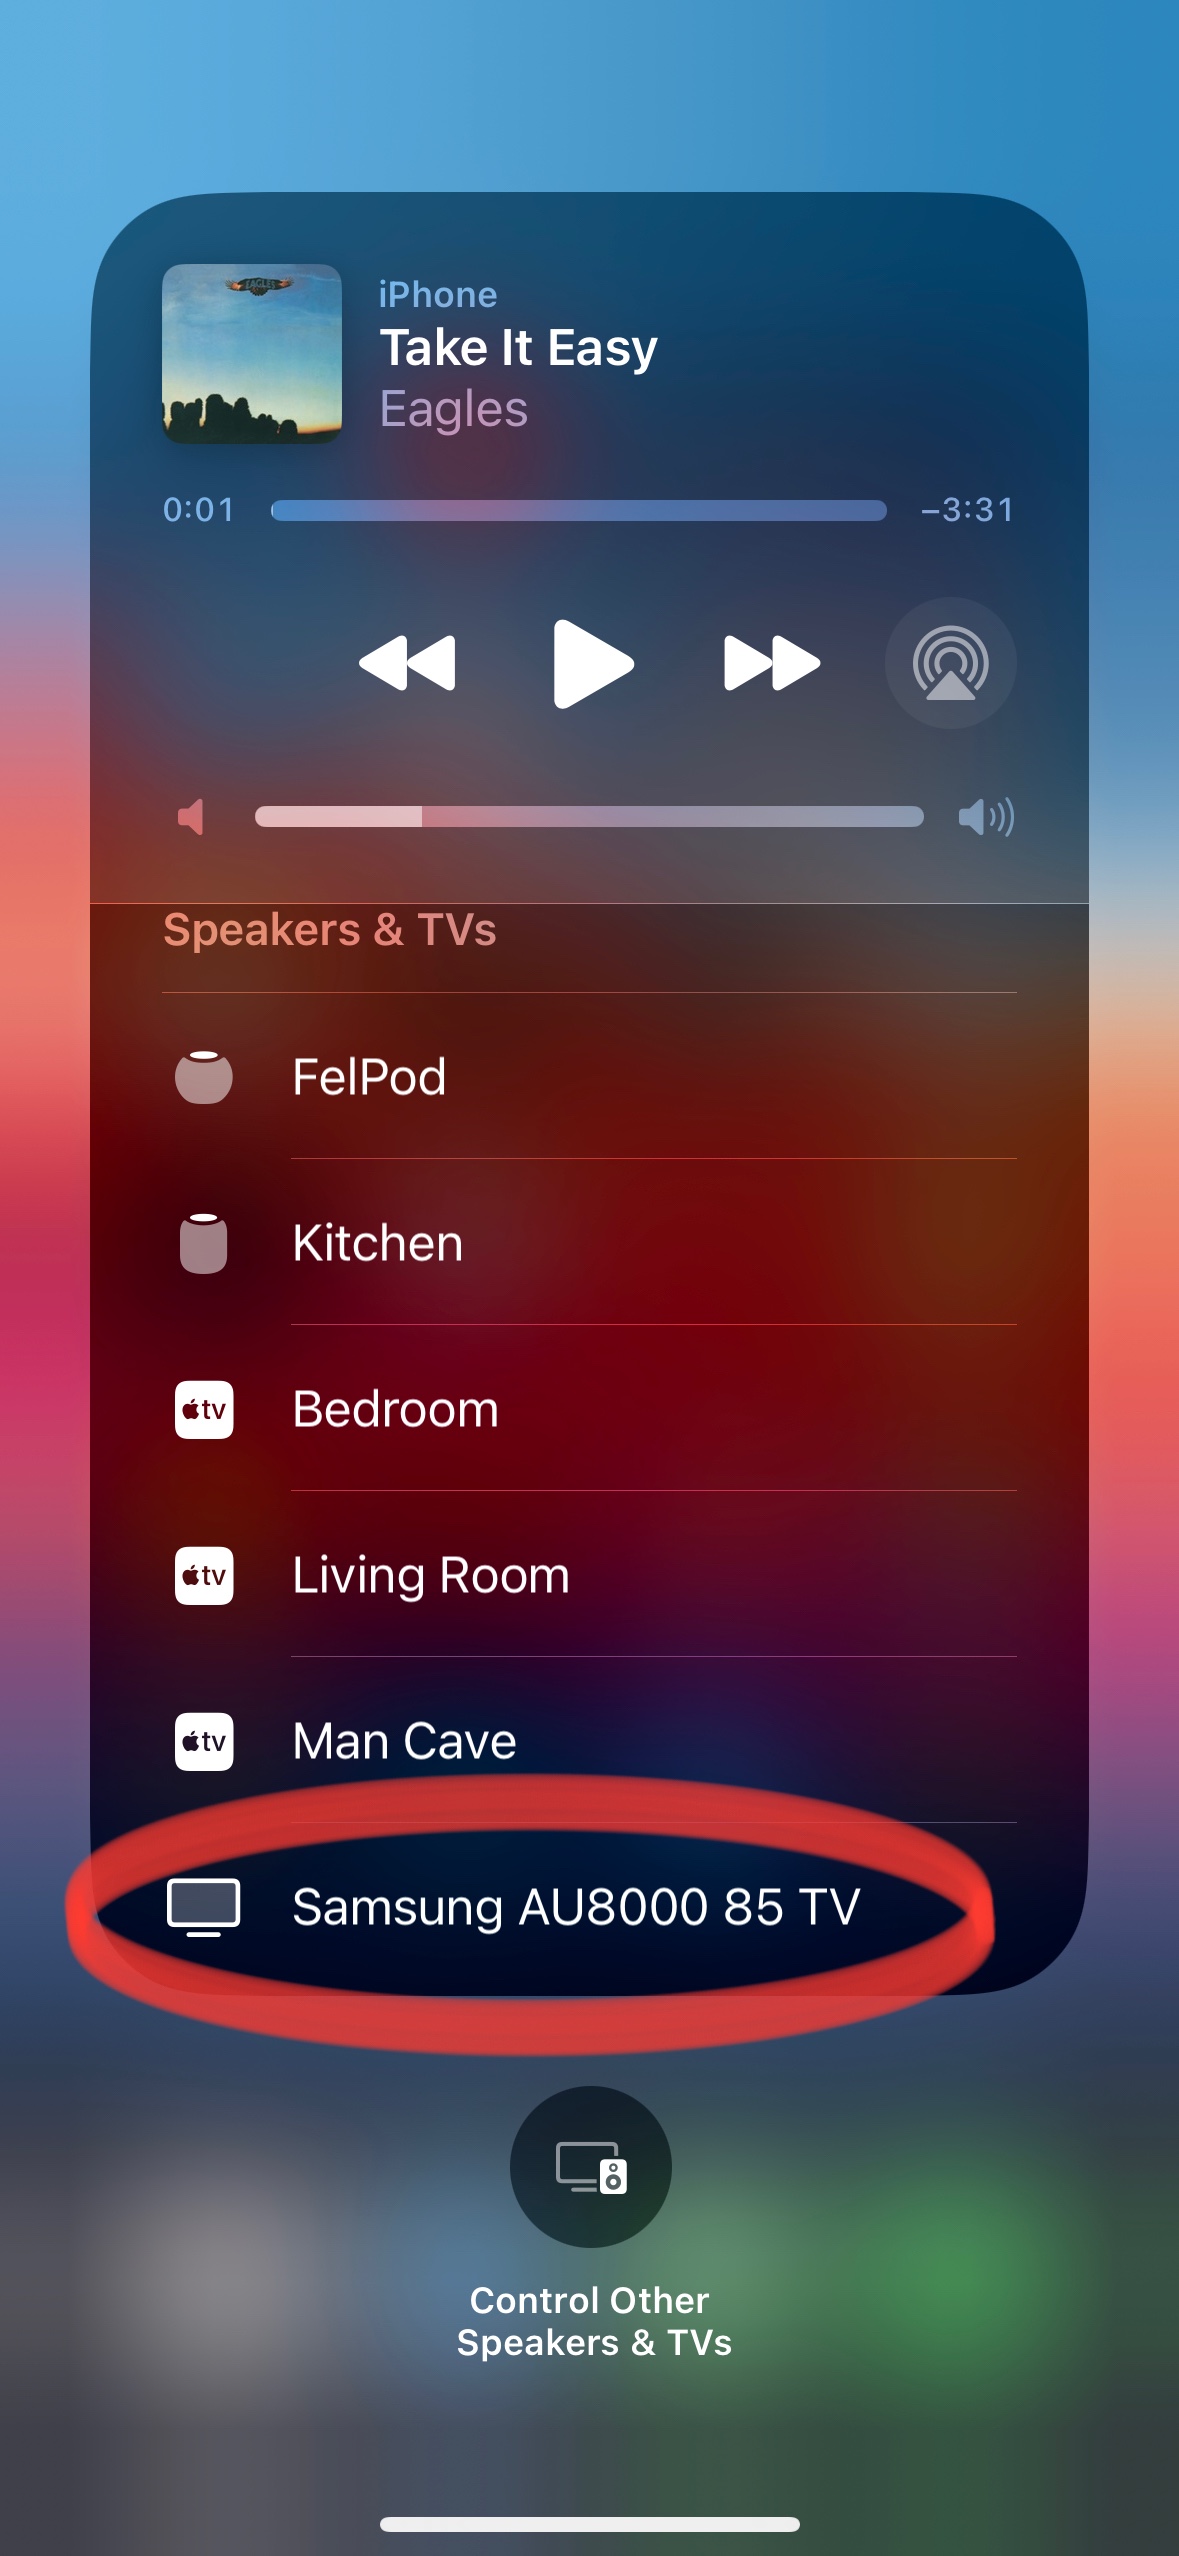 Here's how to turn off AirPlay on Apple devices